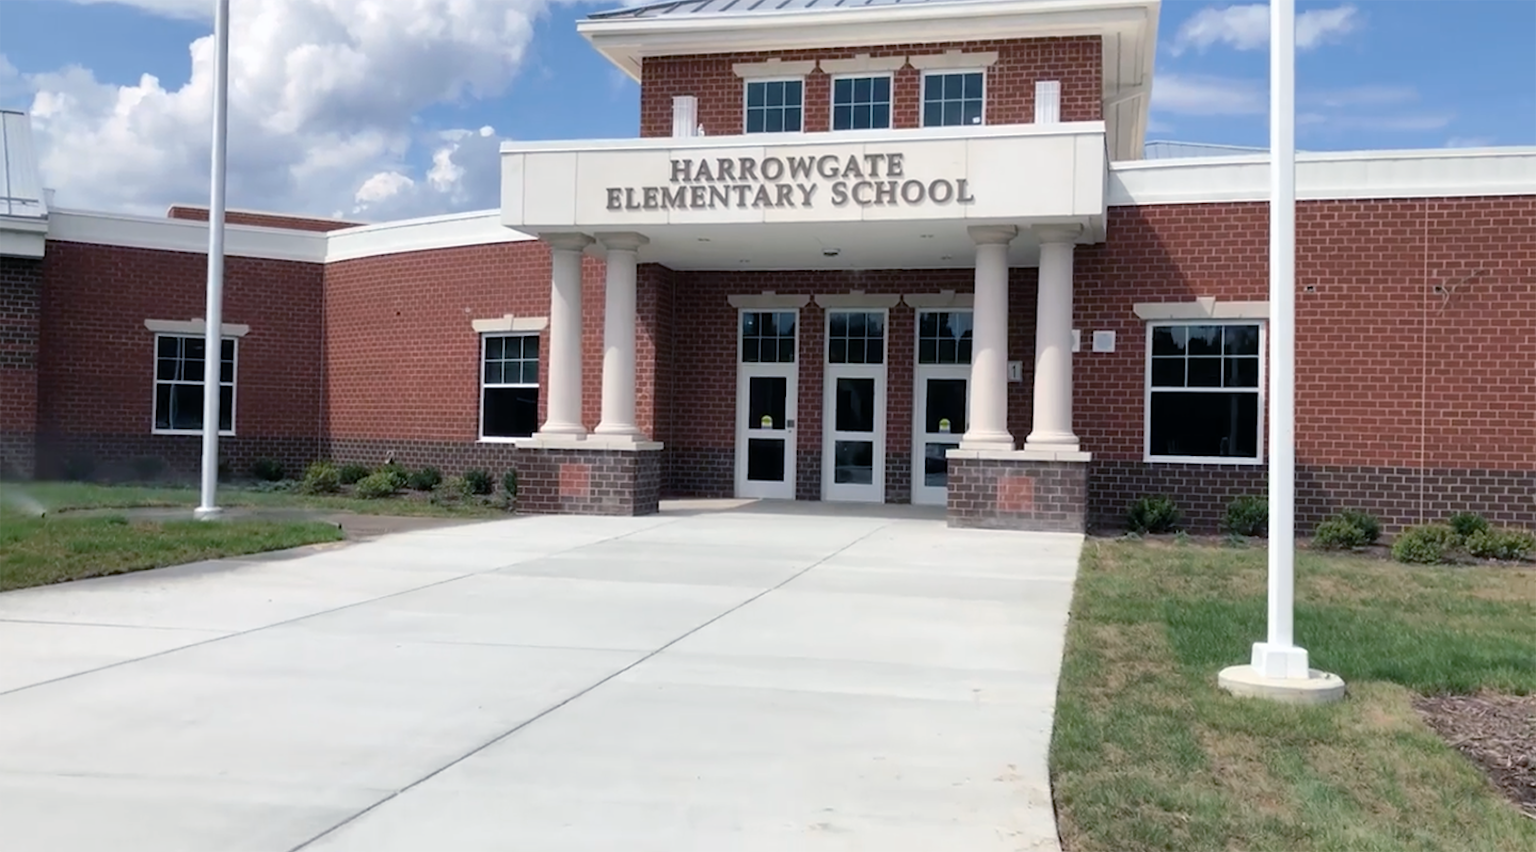 Chesterfield County (Va.) district is dedicating 3 replacement school